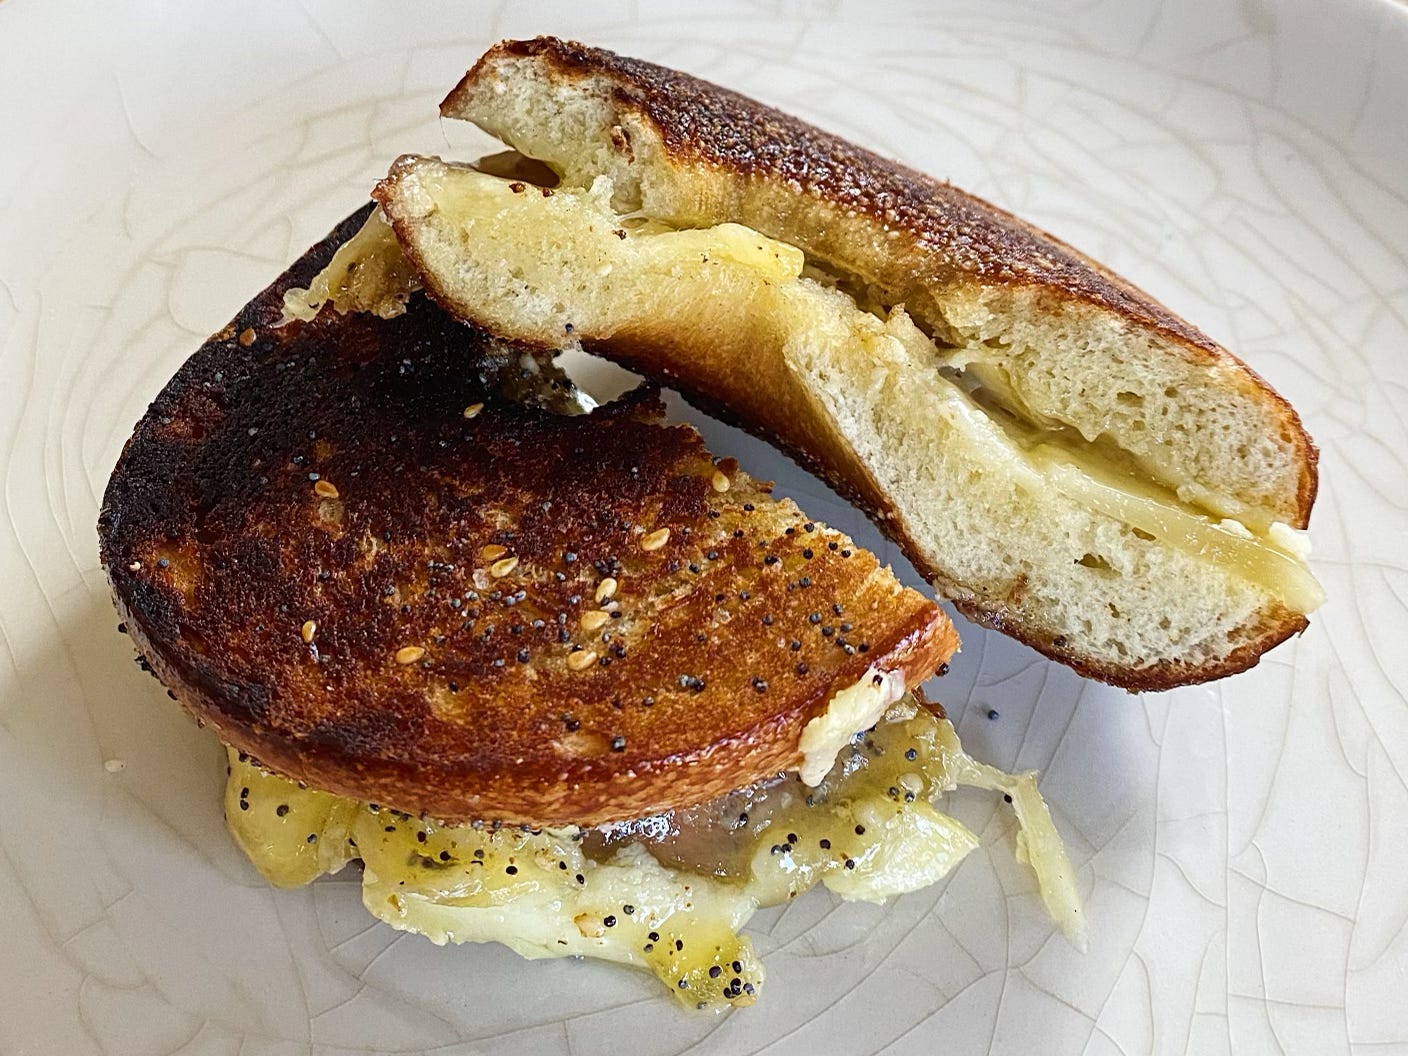 Two halves of bagel grilled-cheese sandwiches—one on an everything bagel, one plain